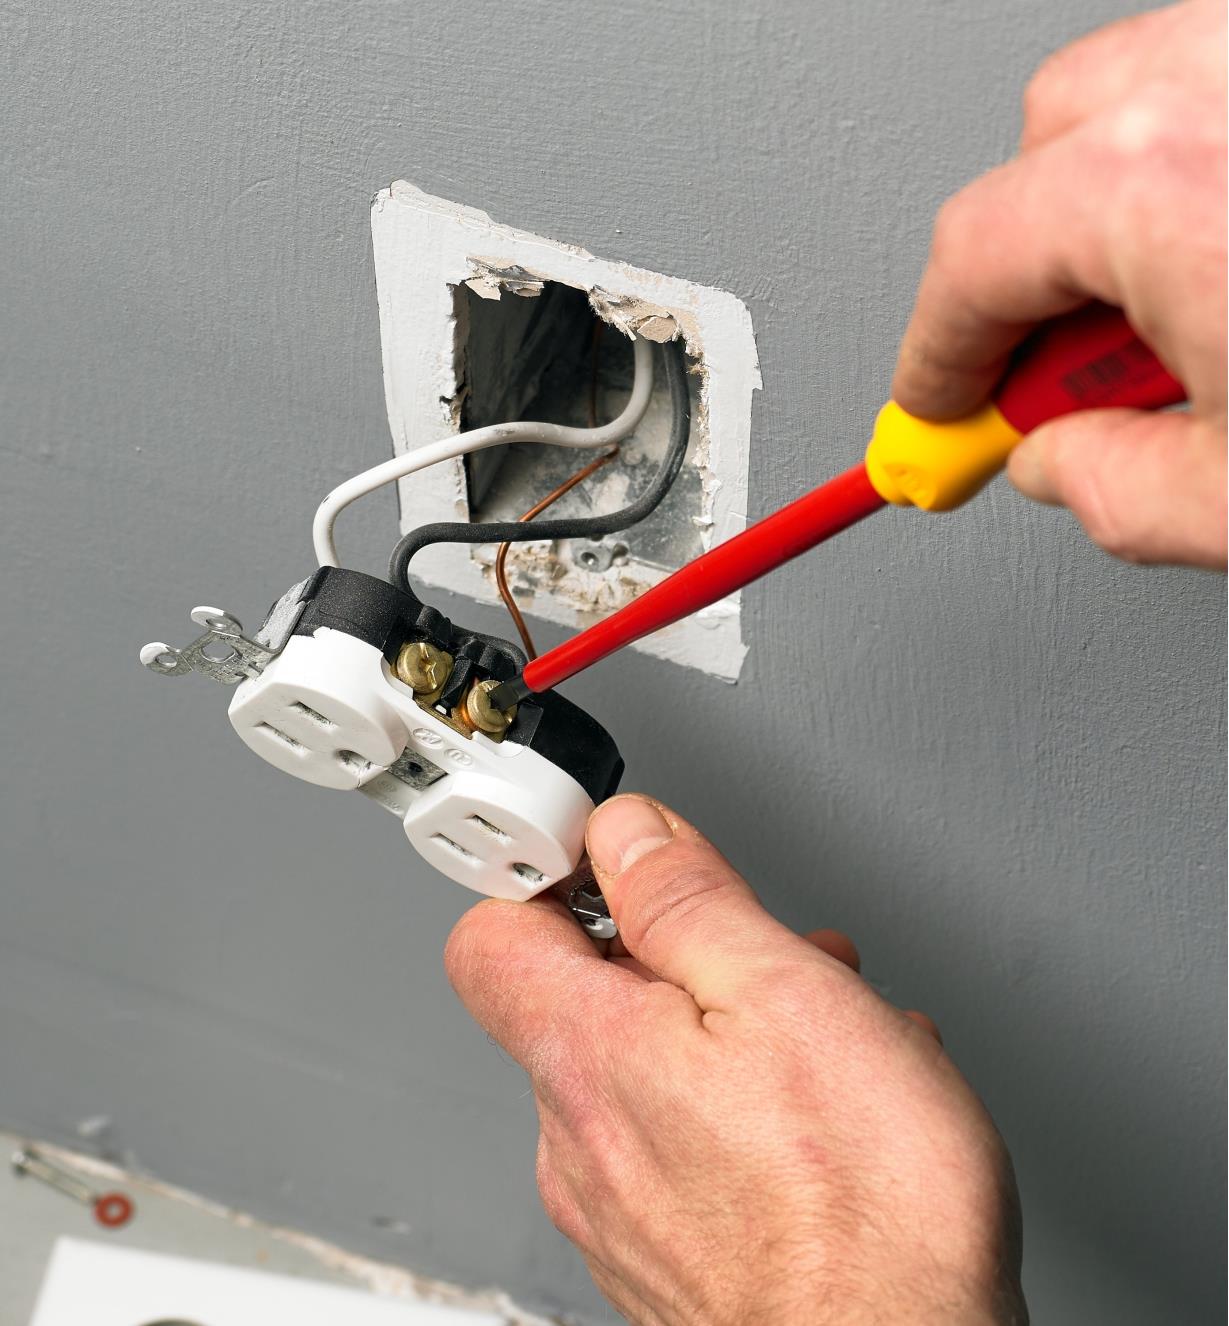 Fixing an electrical outlet with a Wiha insulated screwdriver